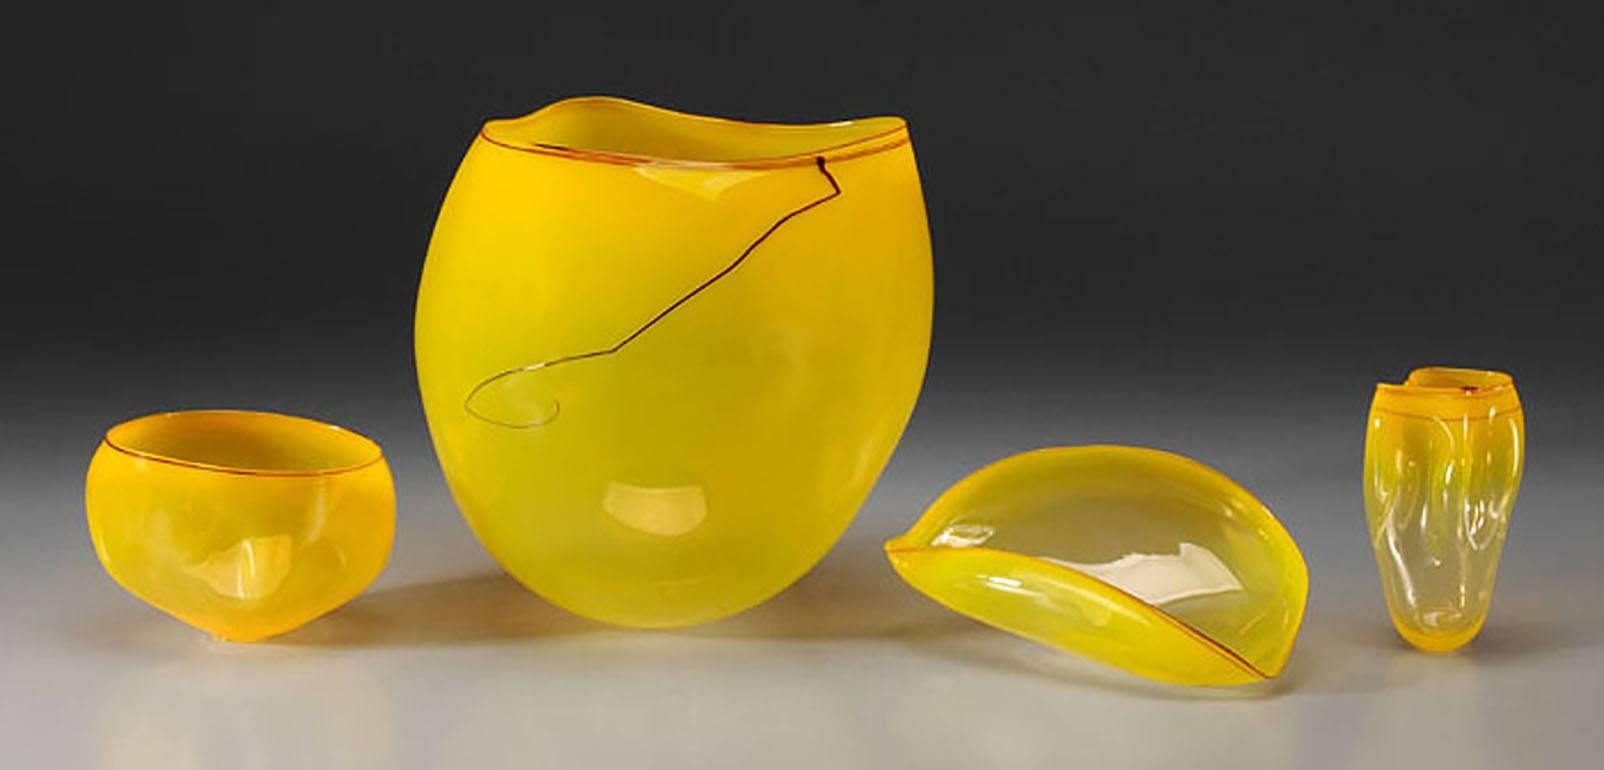 Dale Chihuly Abstract Sculpture - SUN YELLOW BASKET SET